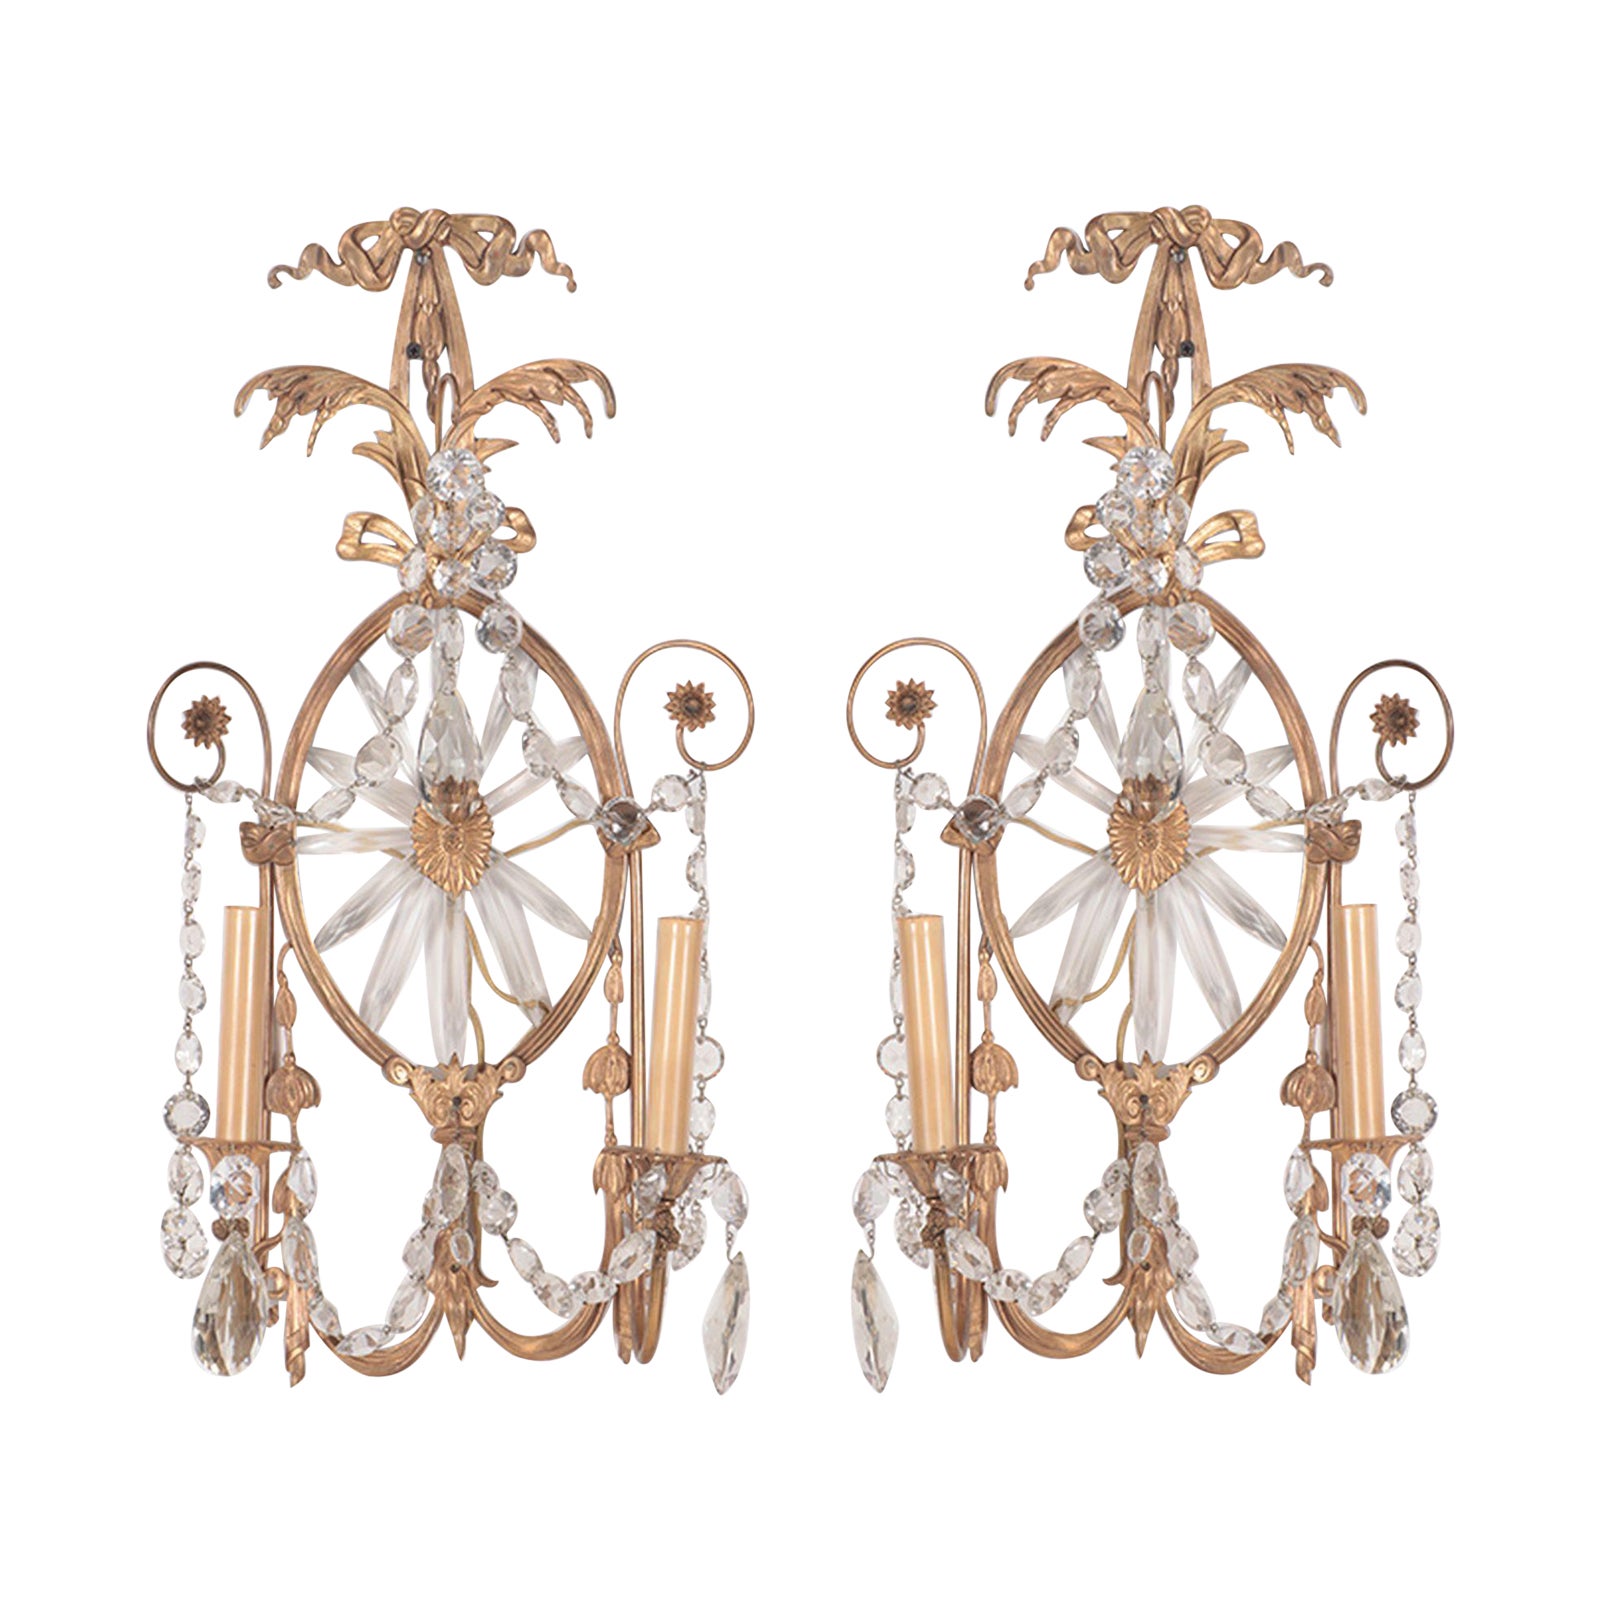 Pair of Early 20th Century Regency Style Bronze & Crystal Wall Sconces For Sale